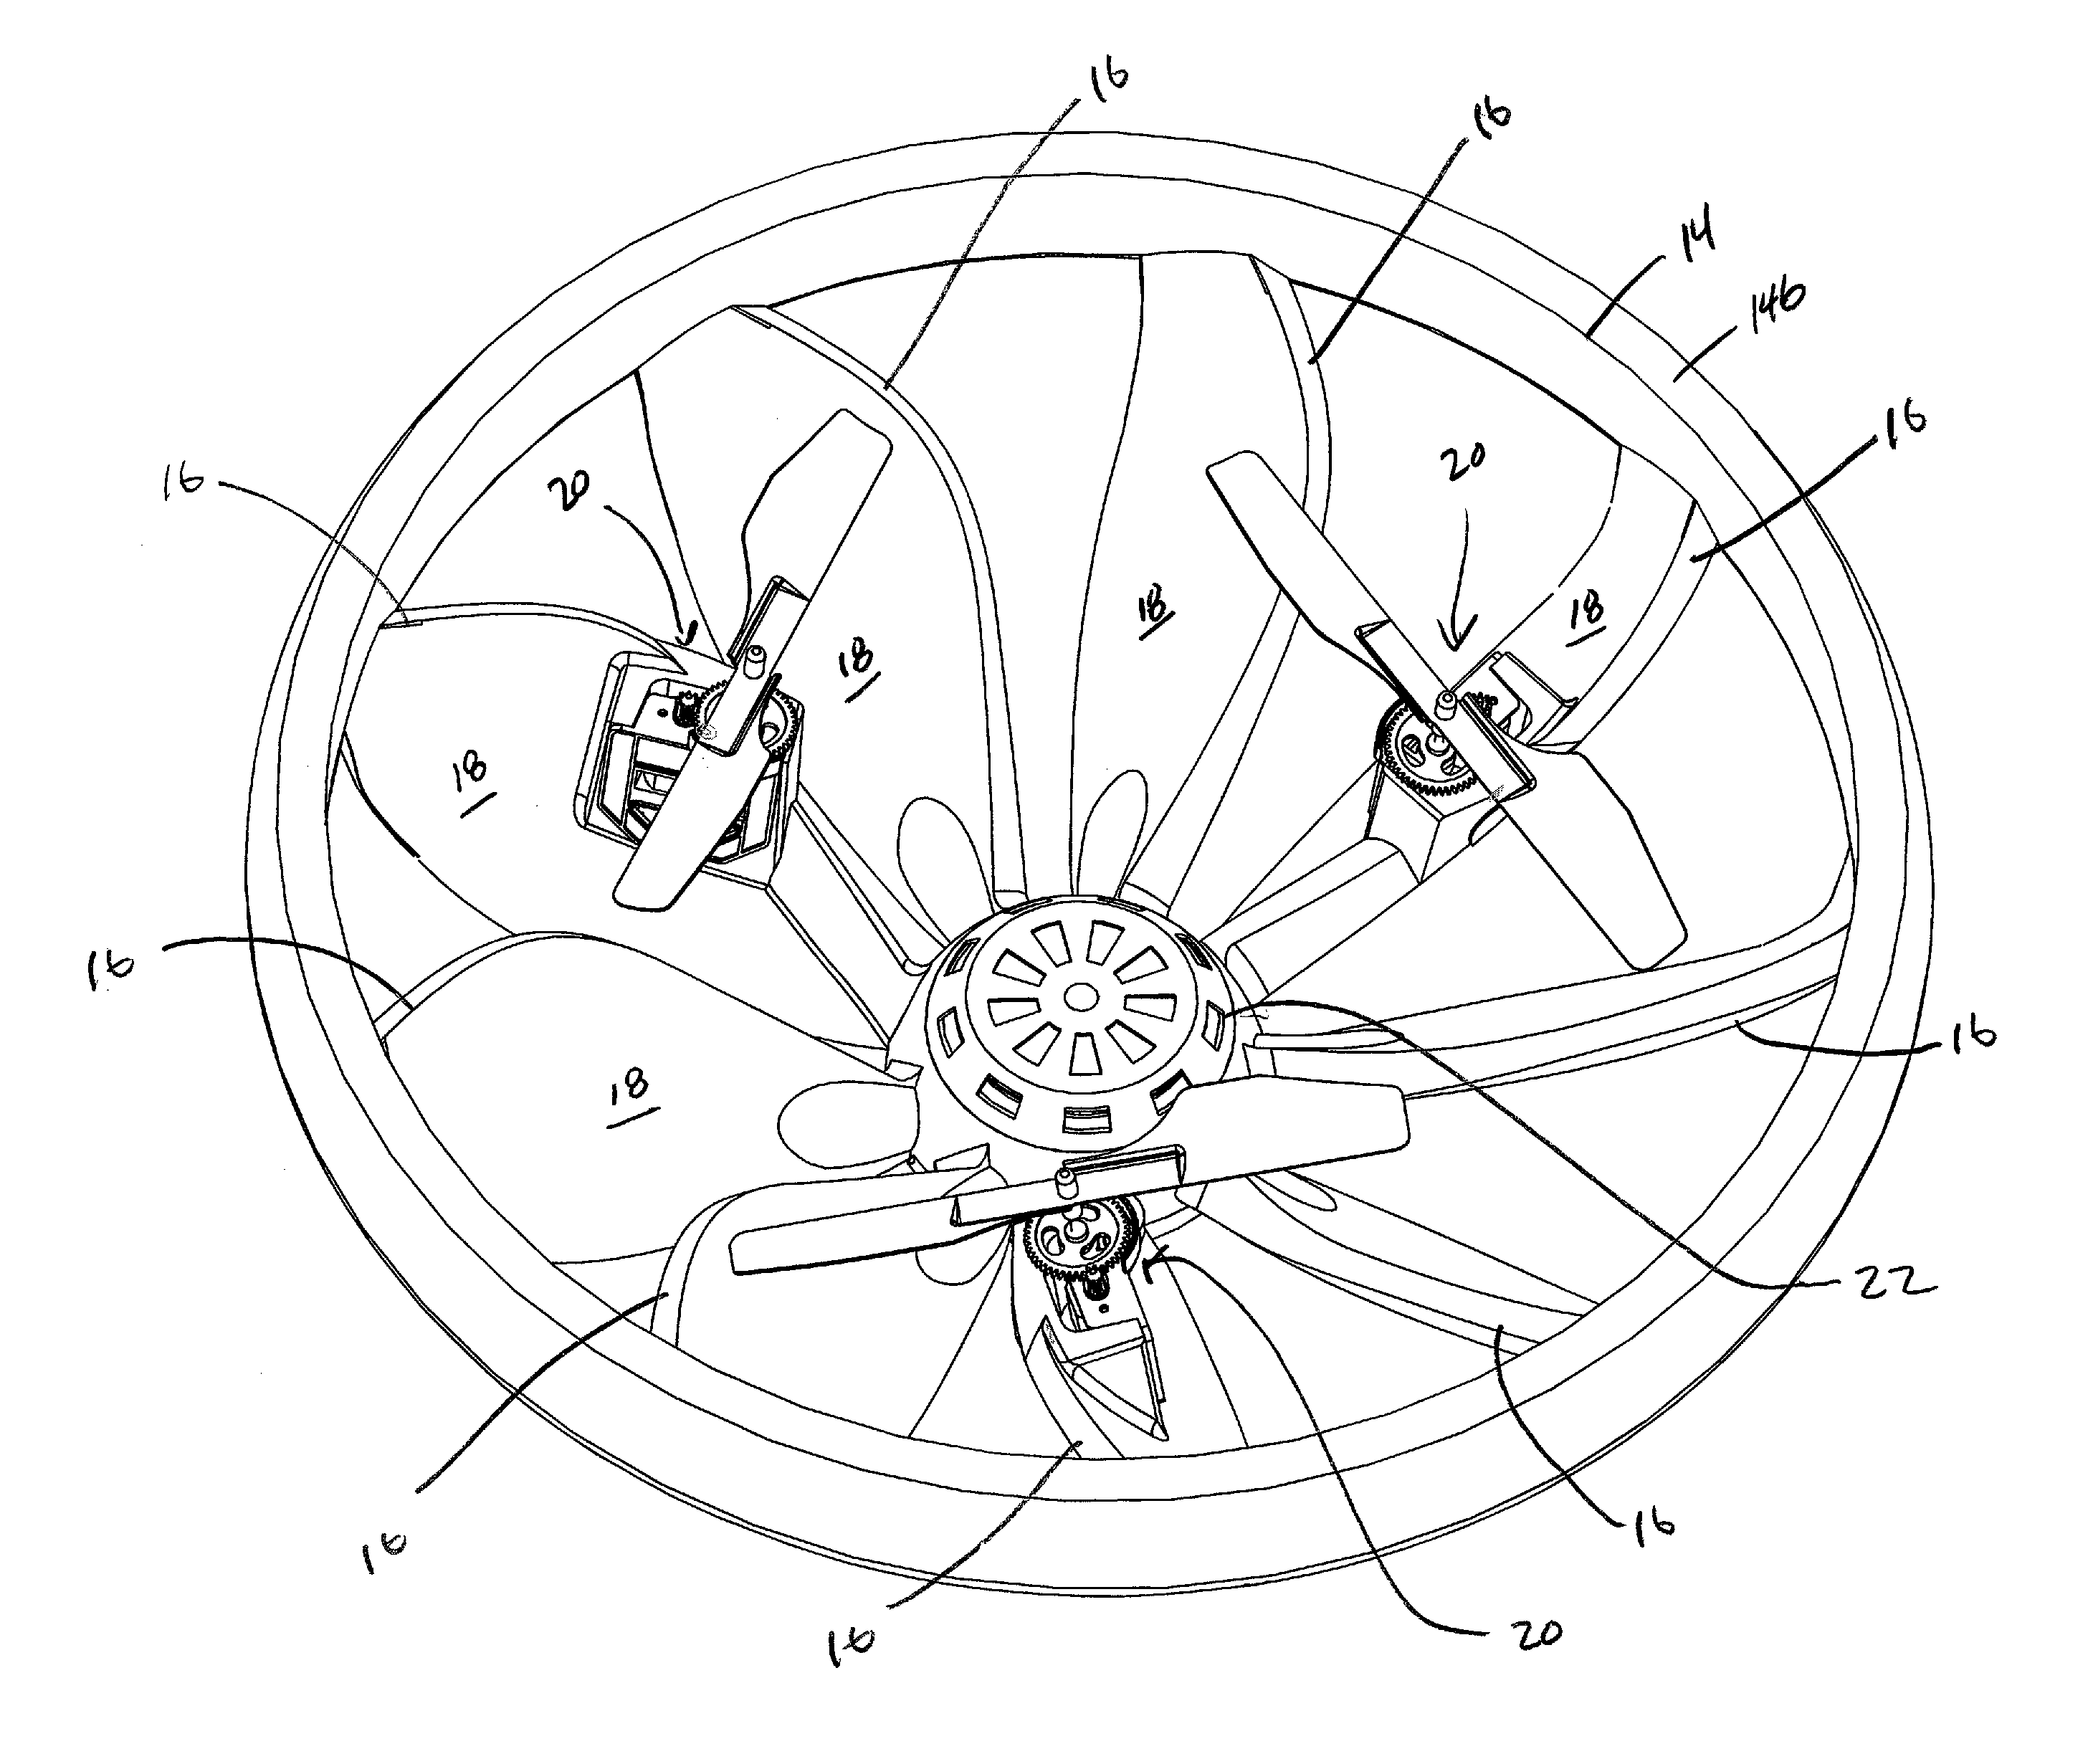 Directionally controllable, self-stabilizing, rotating flying vehicle